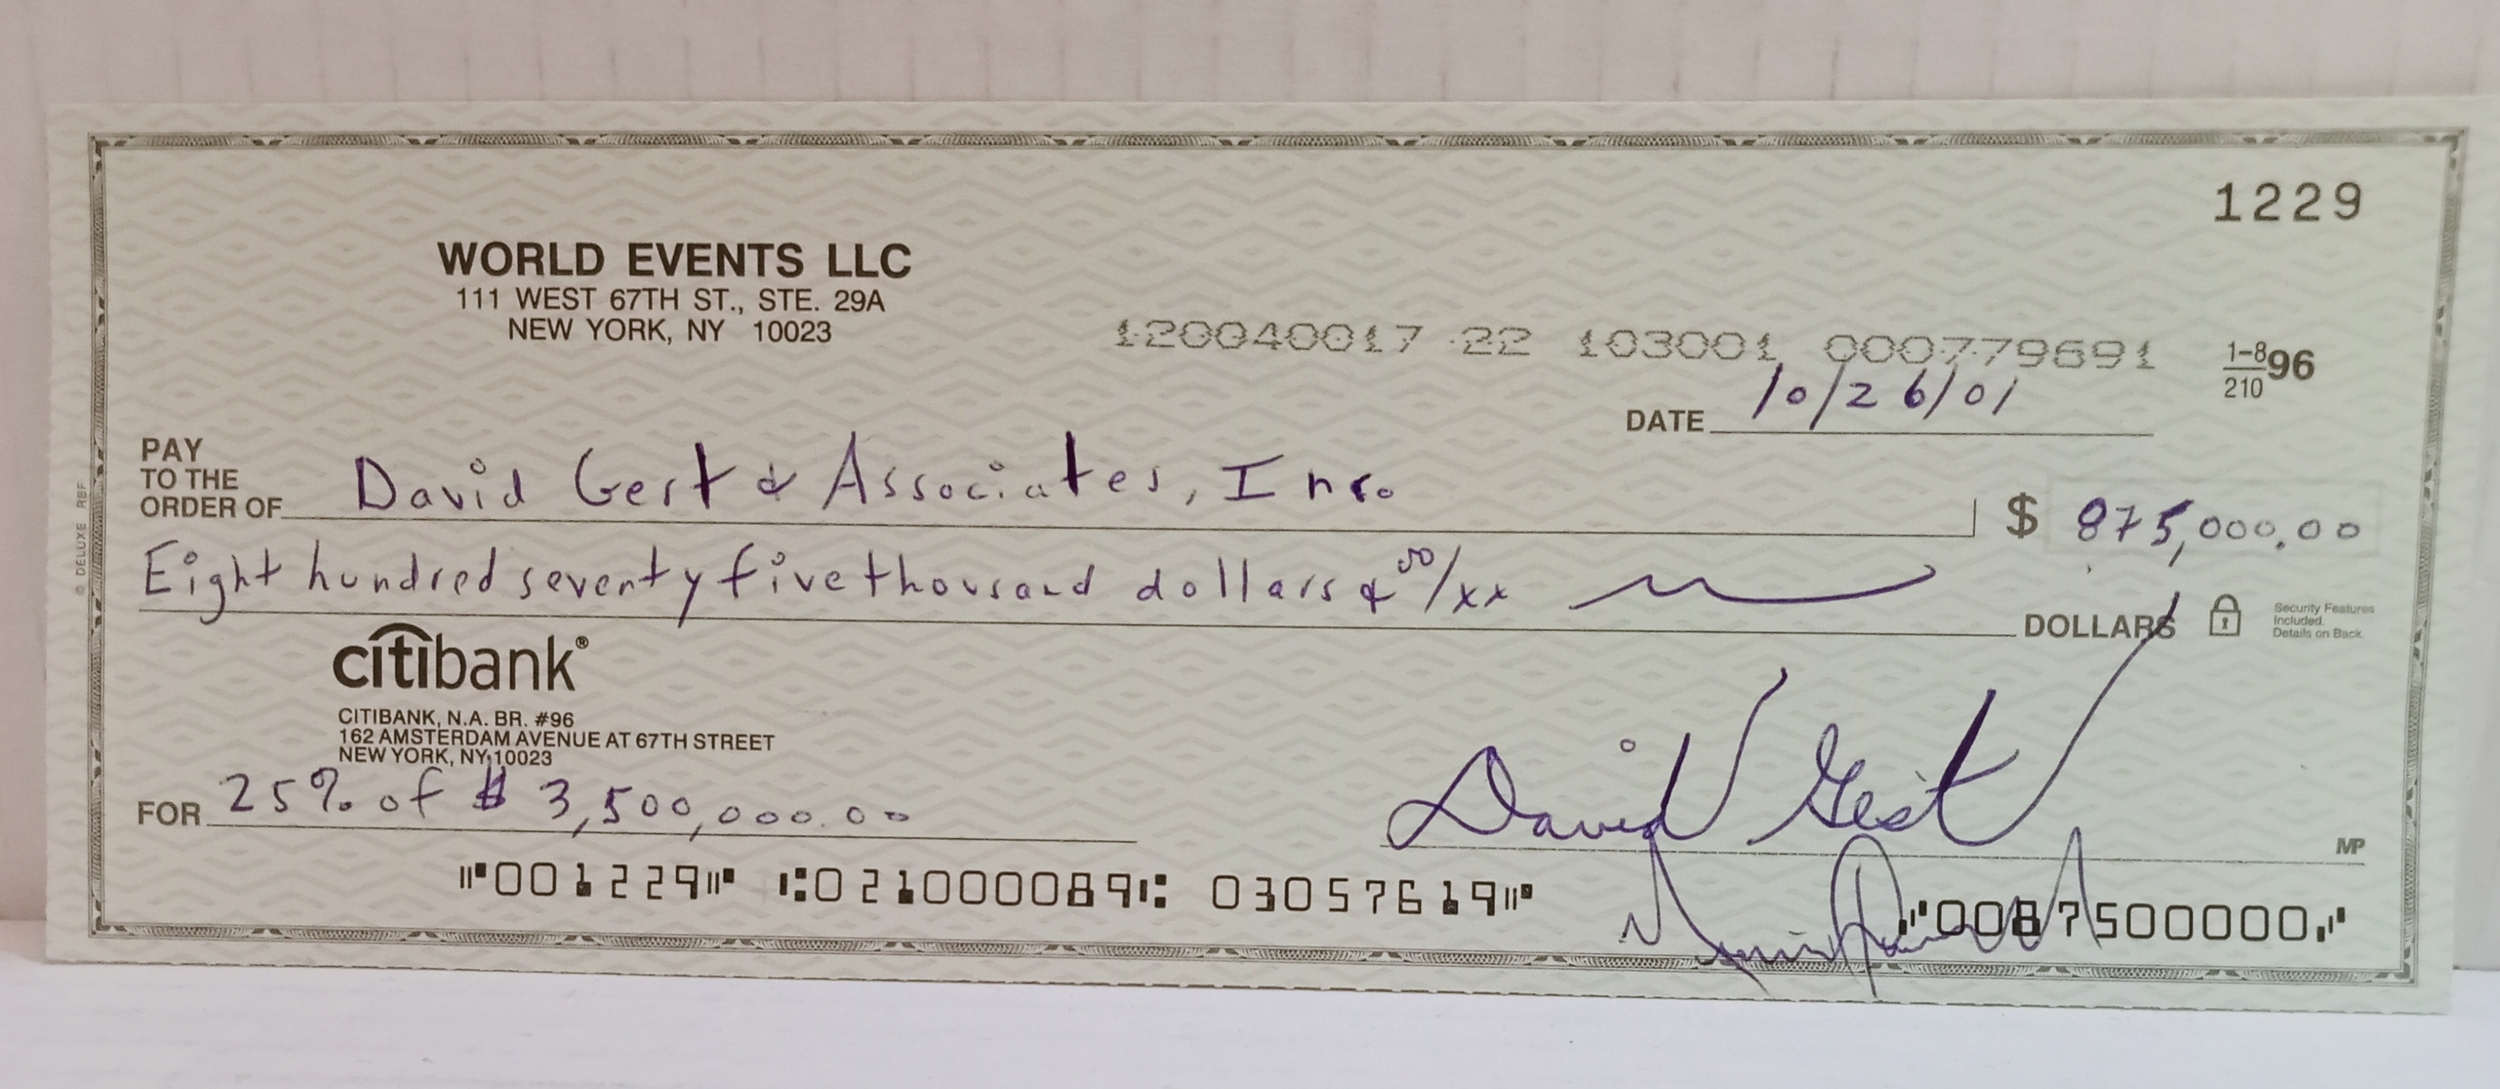 Cheque No 1229 dated 10/26/01 made out to David Gest Associates Inc. signed by David Gest counter